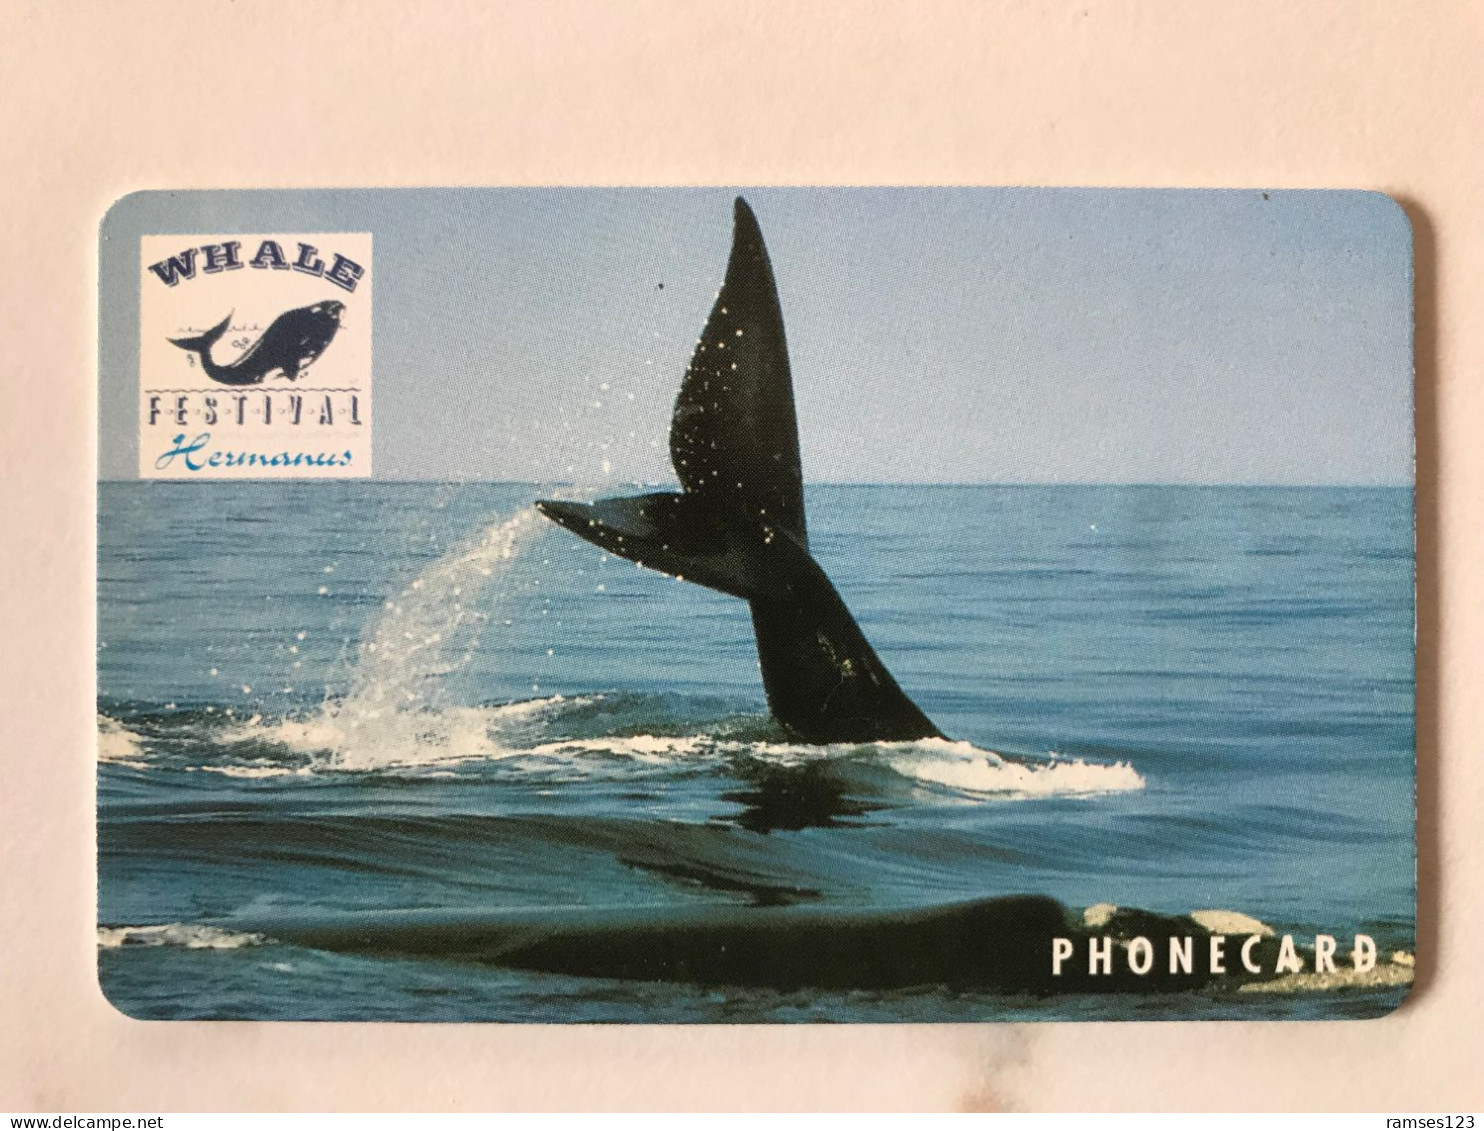 DIFFICULT SOUTH AFRICA  WHALE  FESTIVAL  LIMITED EDITION 500 - Zuid-Afrika